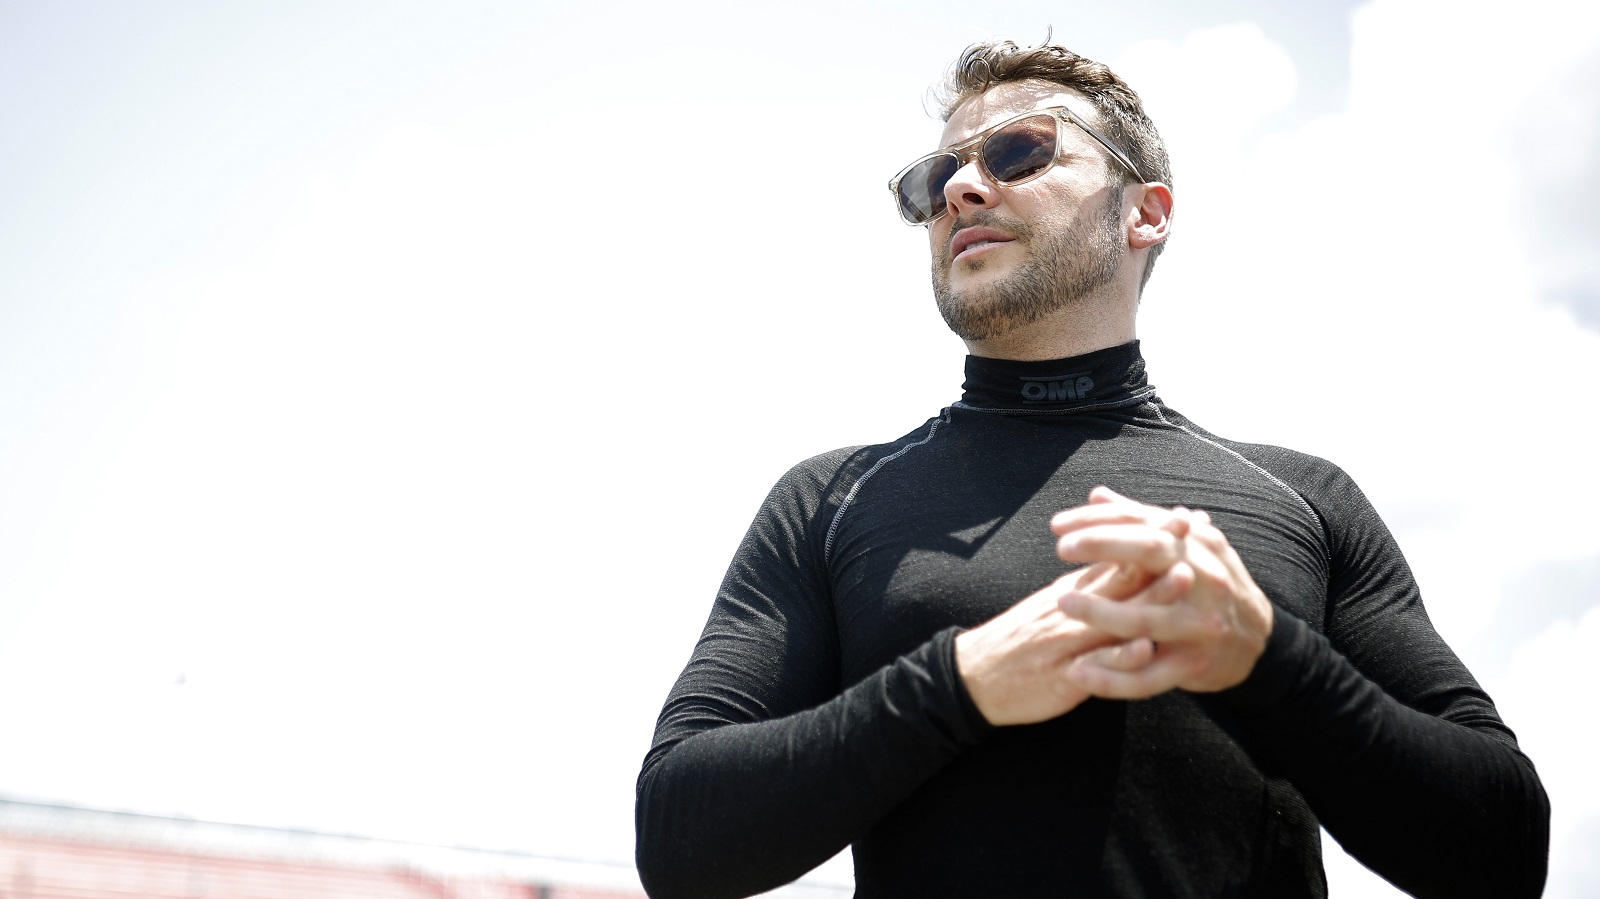 Marco Andretti stands on the grid during practice for the Camping World Superstar Racing Experience event at South Boston Speedway on June 25, 2022 in South Boston, Virginia.